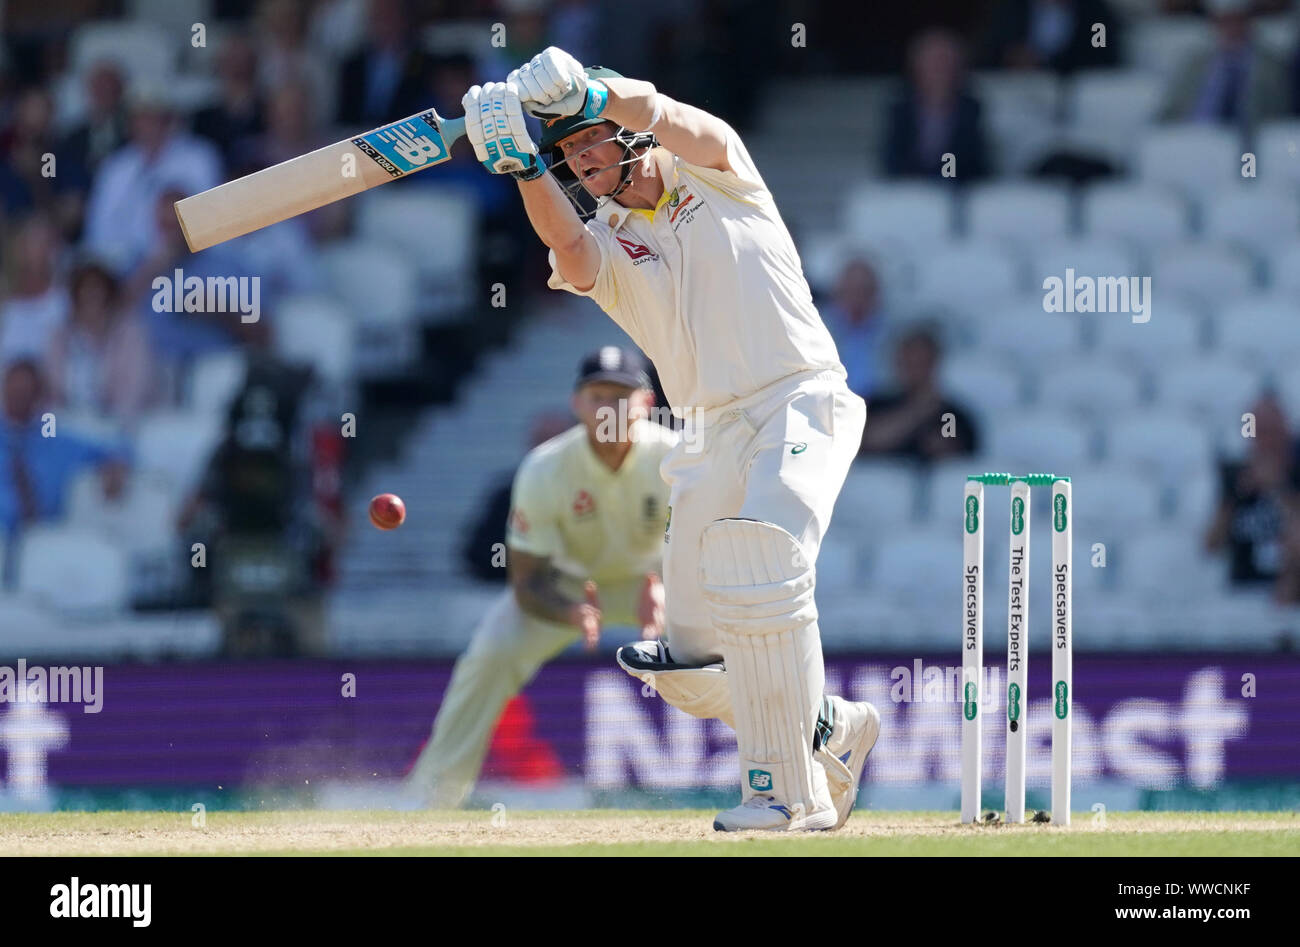 Australia's Steve Smith bats during day four of the fifth test match at The Kia Oval, London. Stock Photo